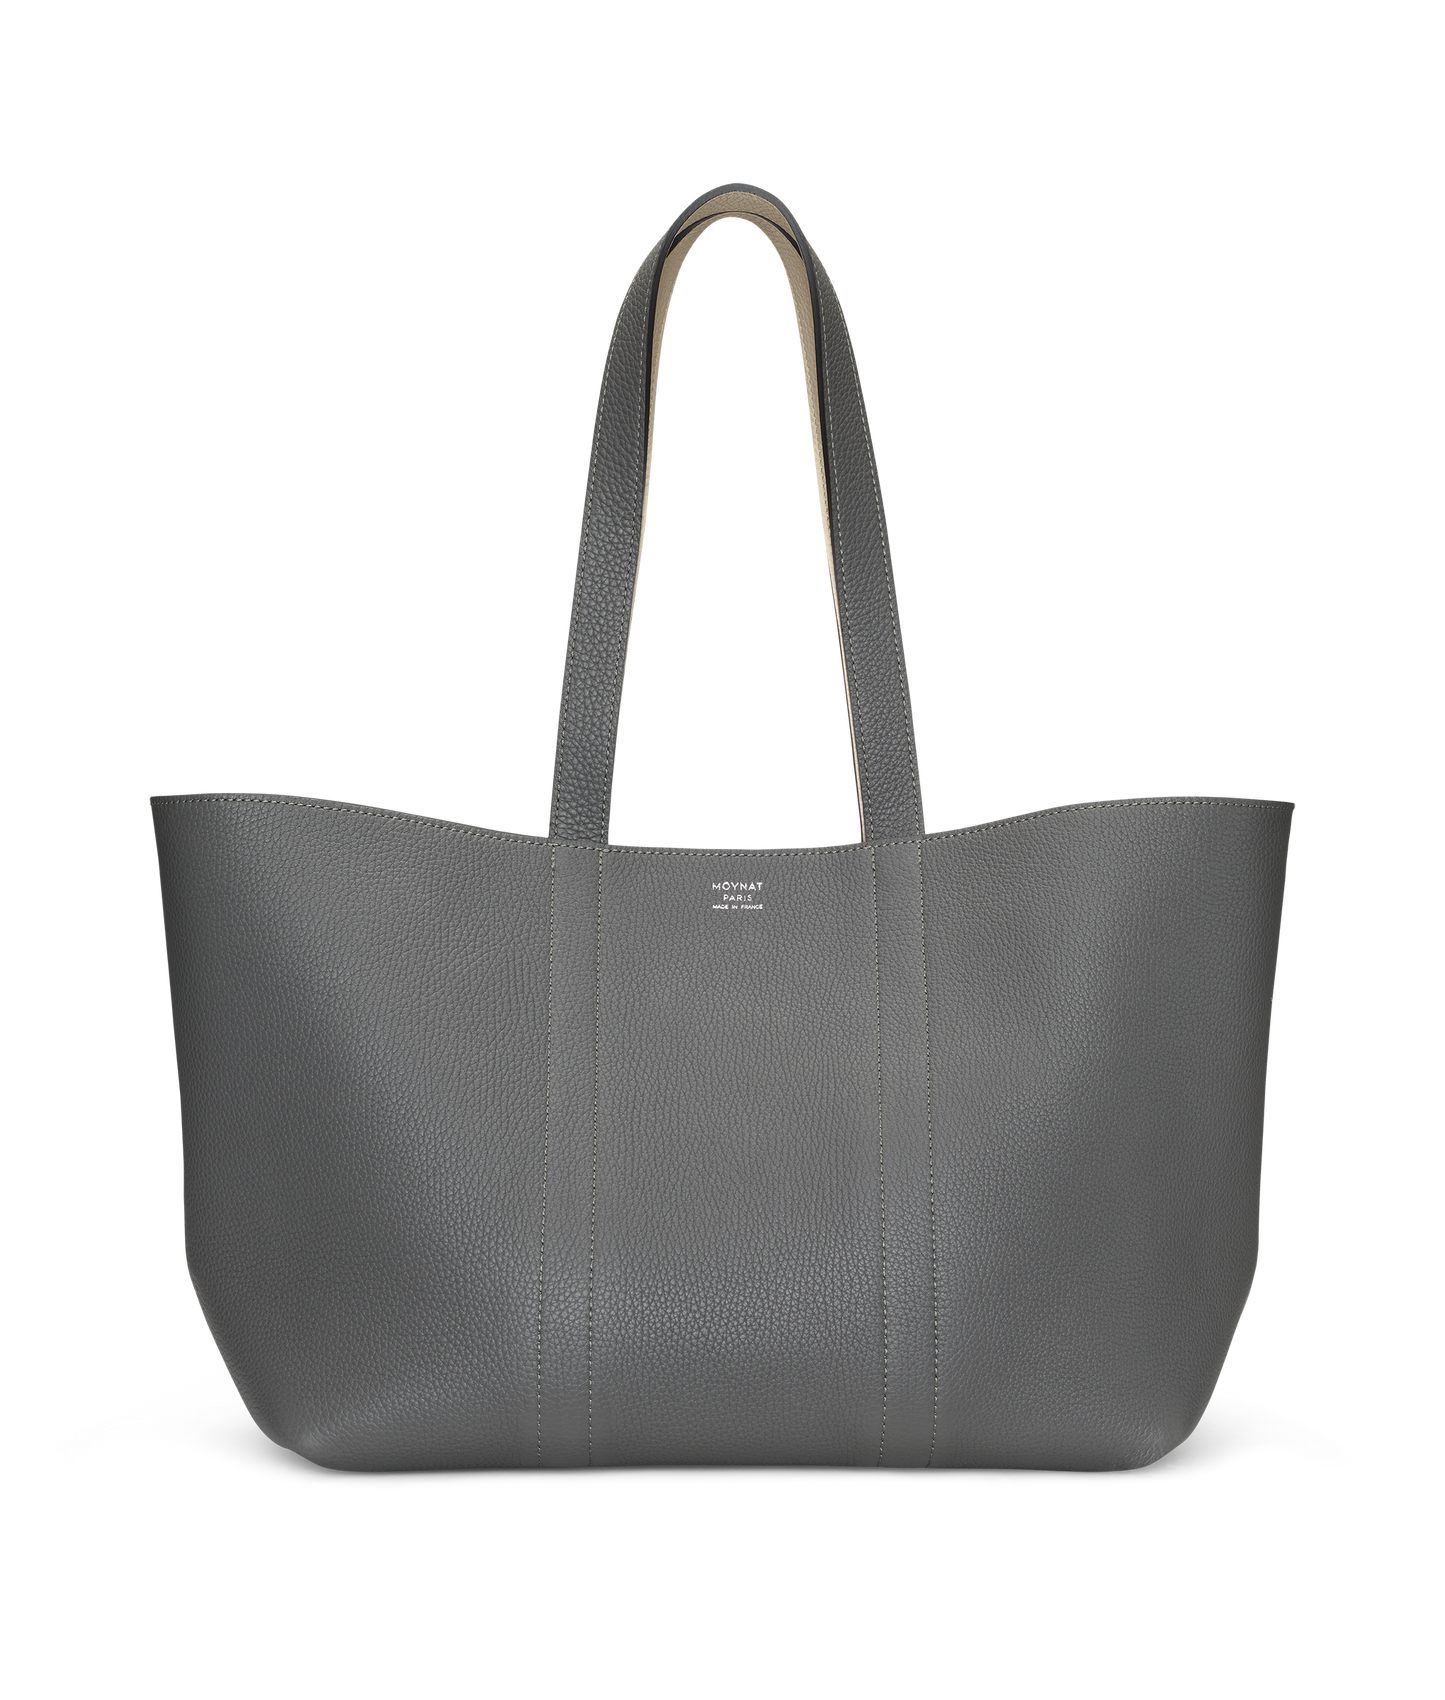 Moynat Shrinks The Duo Tote Into An Adorable BB Size - BAGAHOLICBOY